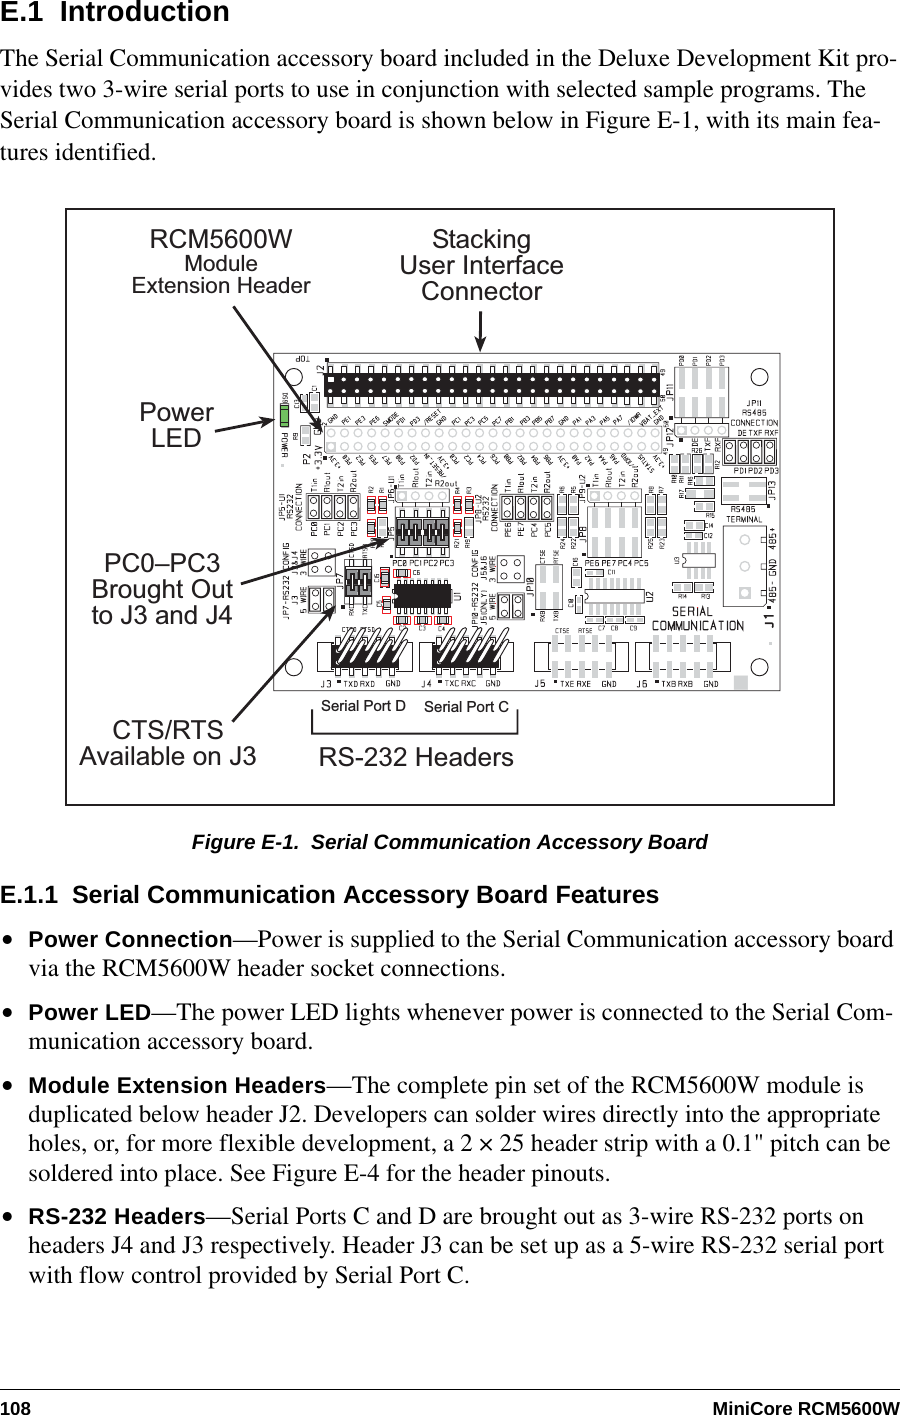 108 MiniCore RCM5600WE.1  IntroductionThe Serial Communication accessory board included in the Deluxe Development Kit pro-vides two 3-wire serial ports to use in conjunction with selected sample programs. The Serial Communication accessory board is shown below in Figure E-1, with its main fea-tures identified.Figure E-1.  Serial Communication Accessory BoardE.1.1  Serial Communication Accessory Board Features•Power Connection—Power is supplied to the Serial Communication accessory board via the RCM5600W header socket connections.•Power LED—The power LED lights whenever power is connected to the Serial Com-munication accessory board.•Module Extension Headers—The complete pin set of the RCM5600W module is duplicated below header J2. Developers can solder wires directly into the appropriate holes, or, for more flexible development, a 2 × 25 header strip with a 0.1&quot; pitch can be soldered into place. See Figure E-4 for the header pinouts.•RS-232 Headers—Serial Ports C and D are brought out as 3-wire RS-232 ports on headers J4 and J3 respectively. Header J3 can be set up as a 5-wire RS-232 serial port with flow control provided by Serial Port C.PowerLEDRCM5600WModuleExtension HeaderCTS/RTSAvailable on J3 RS-232 HeadersPC0PC3Brought Outto J3 and J4Serial Port D Serial Port CStackingUser InterfaceConnector